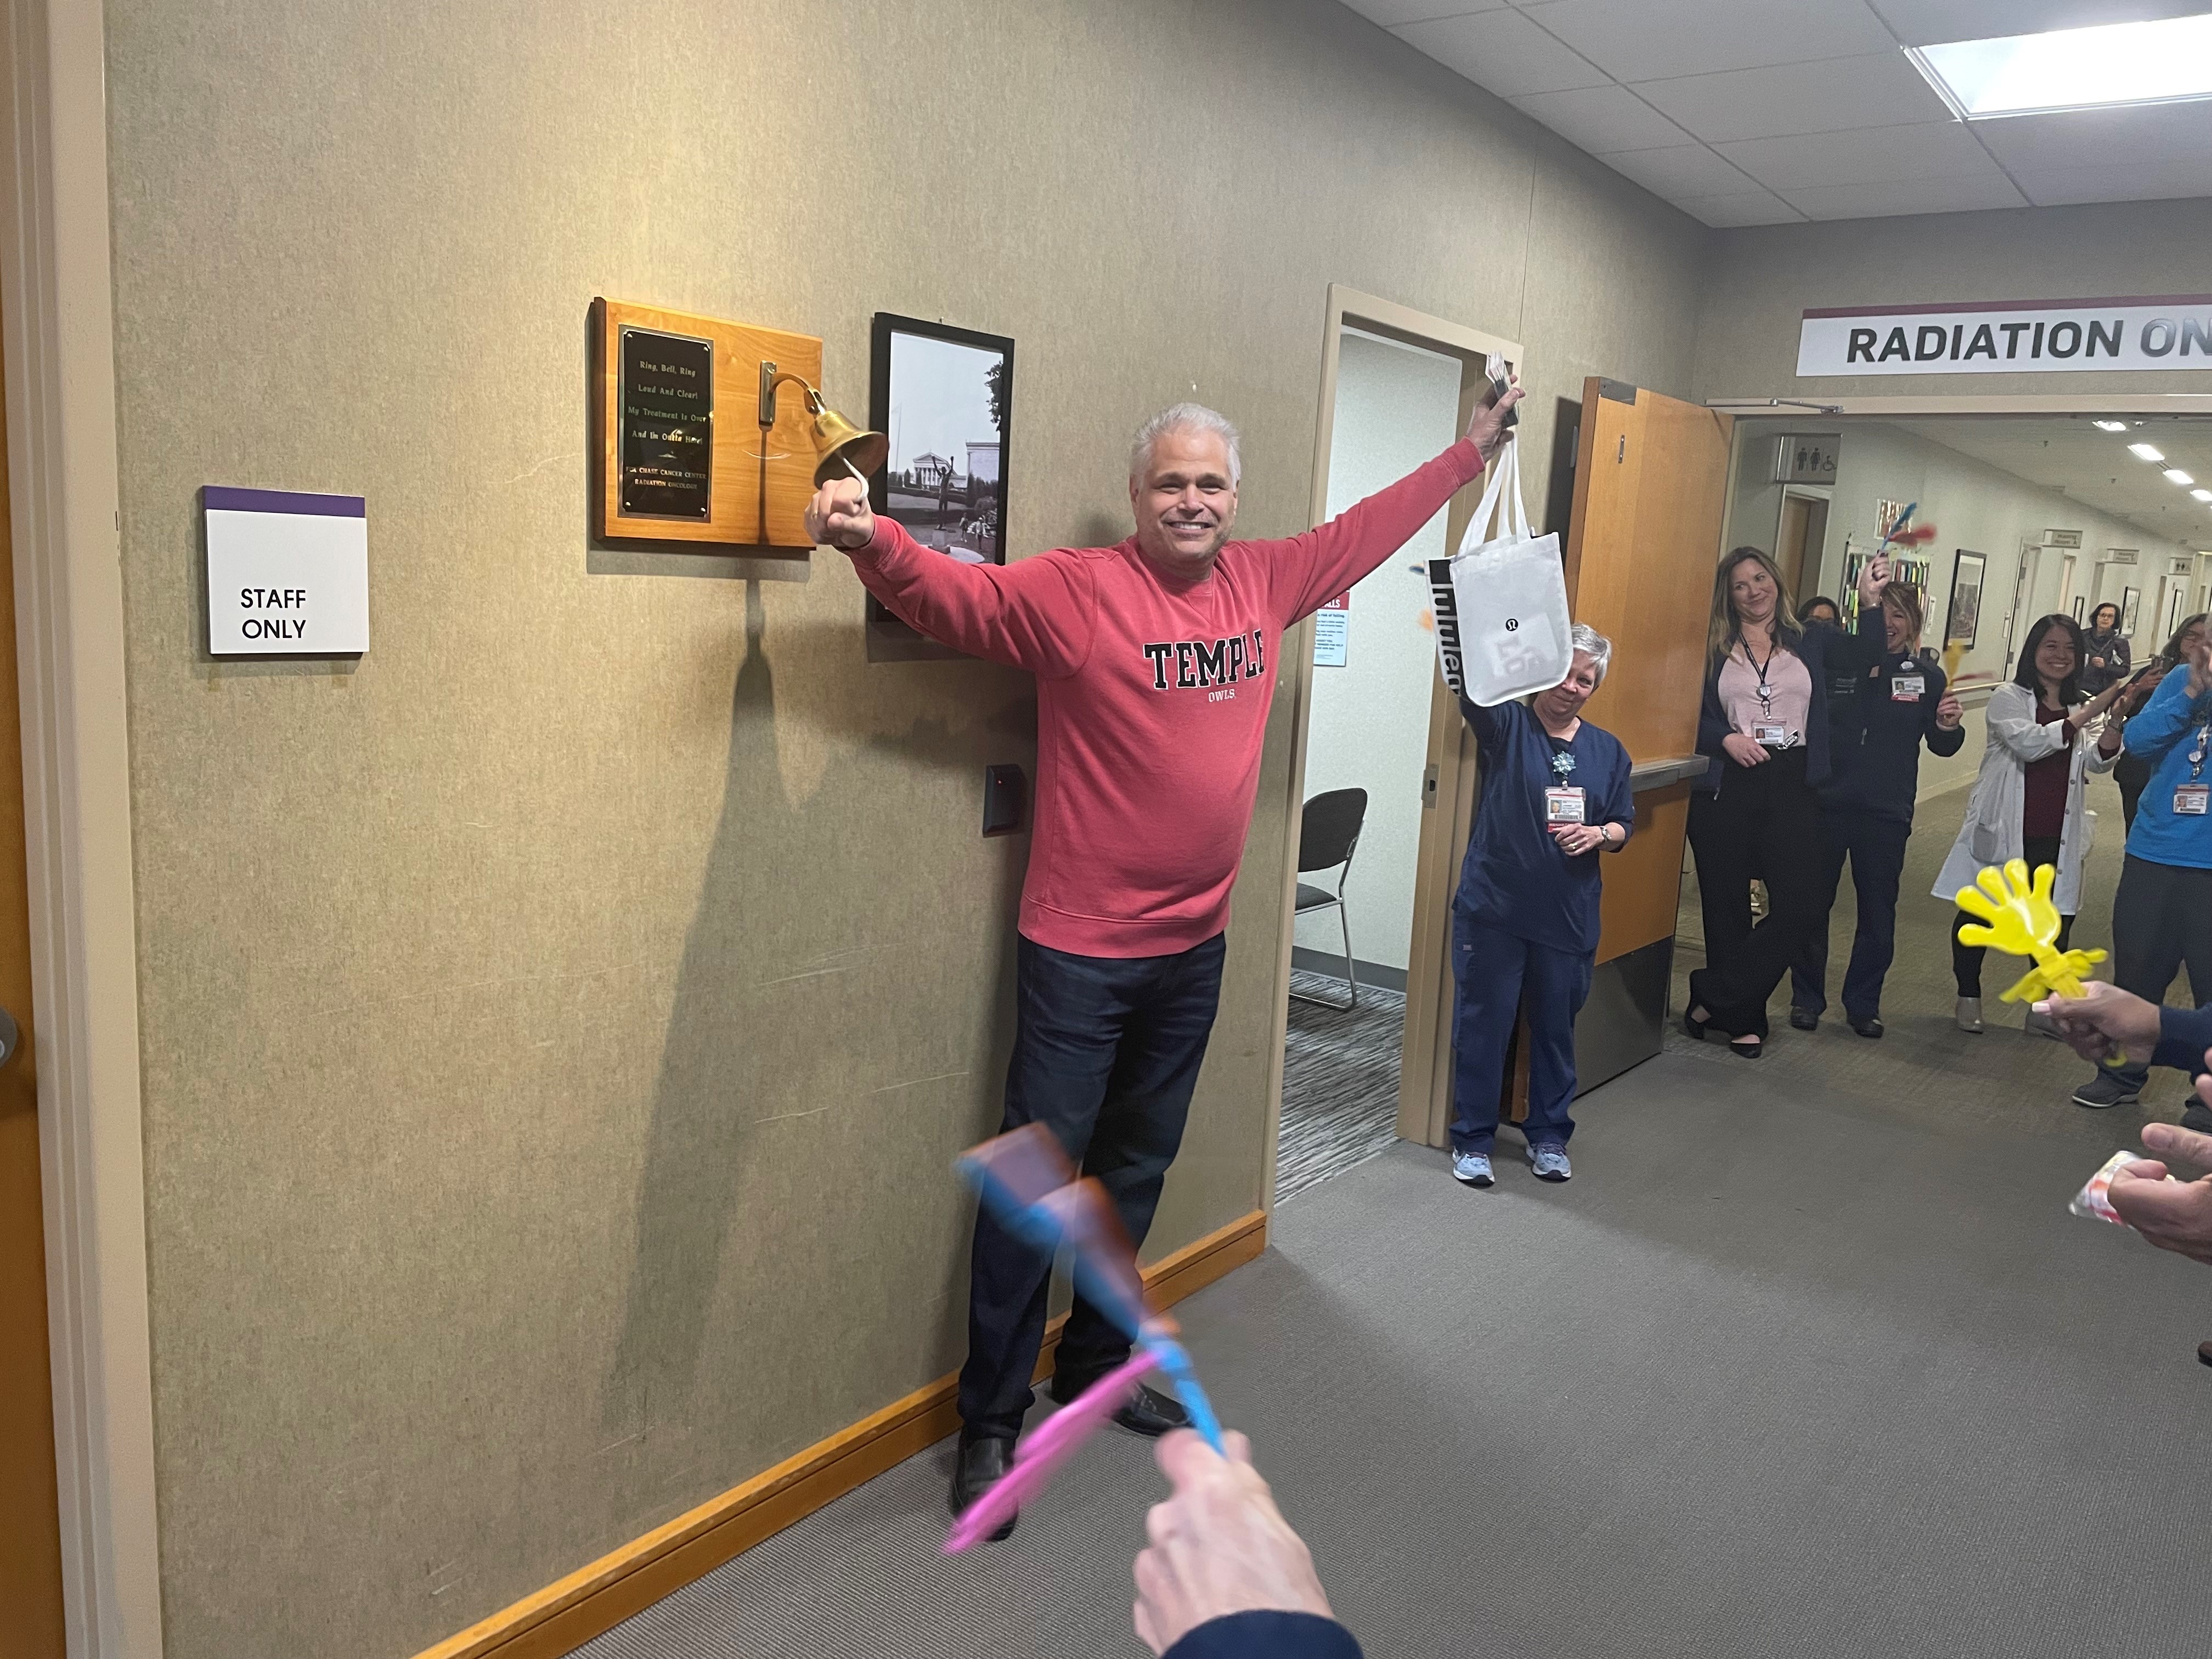 Valentino Cardillo ringing the bell after his last radiation treatment. 